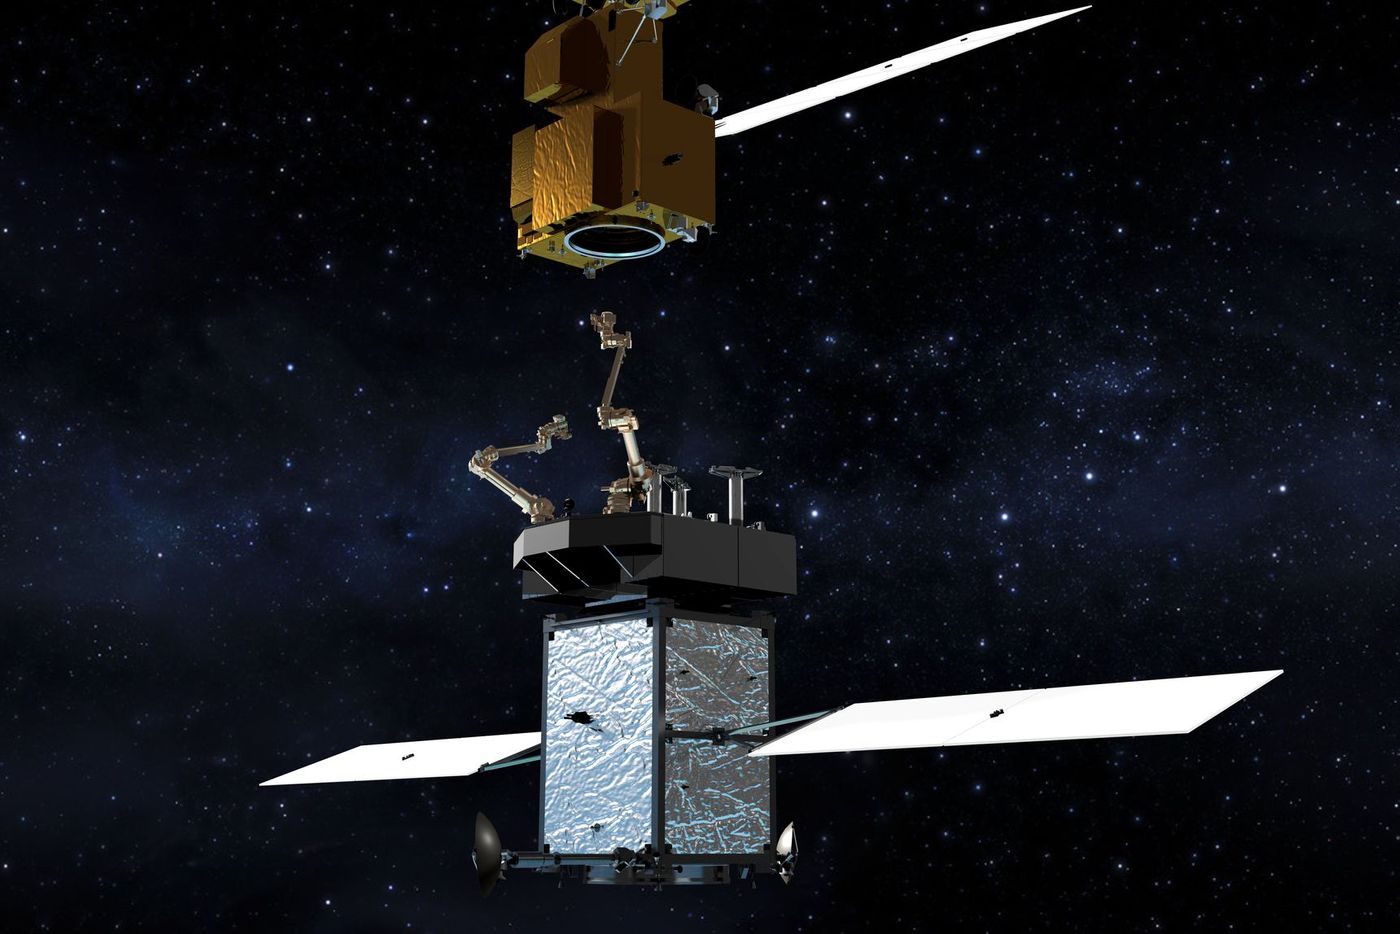 An artist's impression of the Restore L spacecraft that could refuel and service Earth-orbiting satellites in the future.